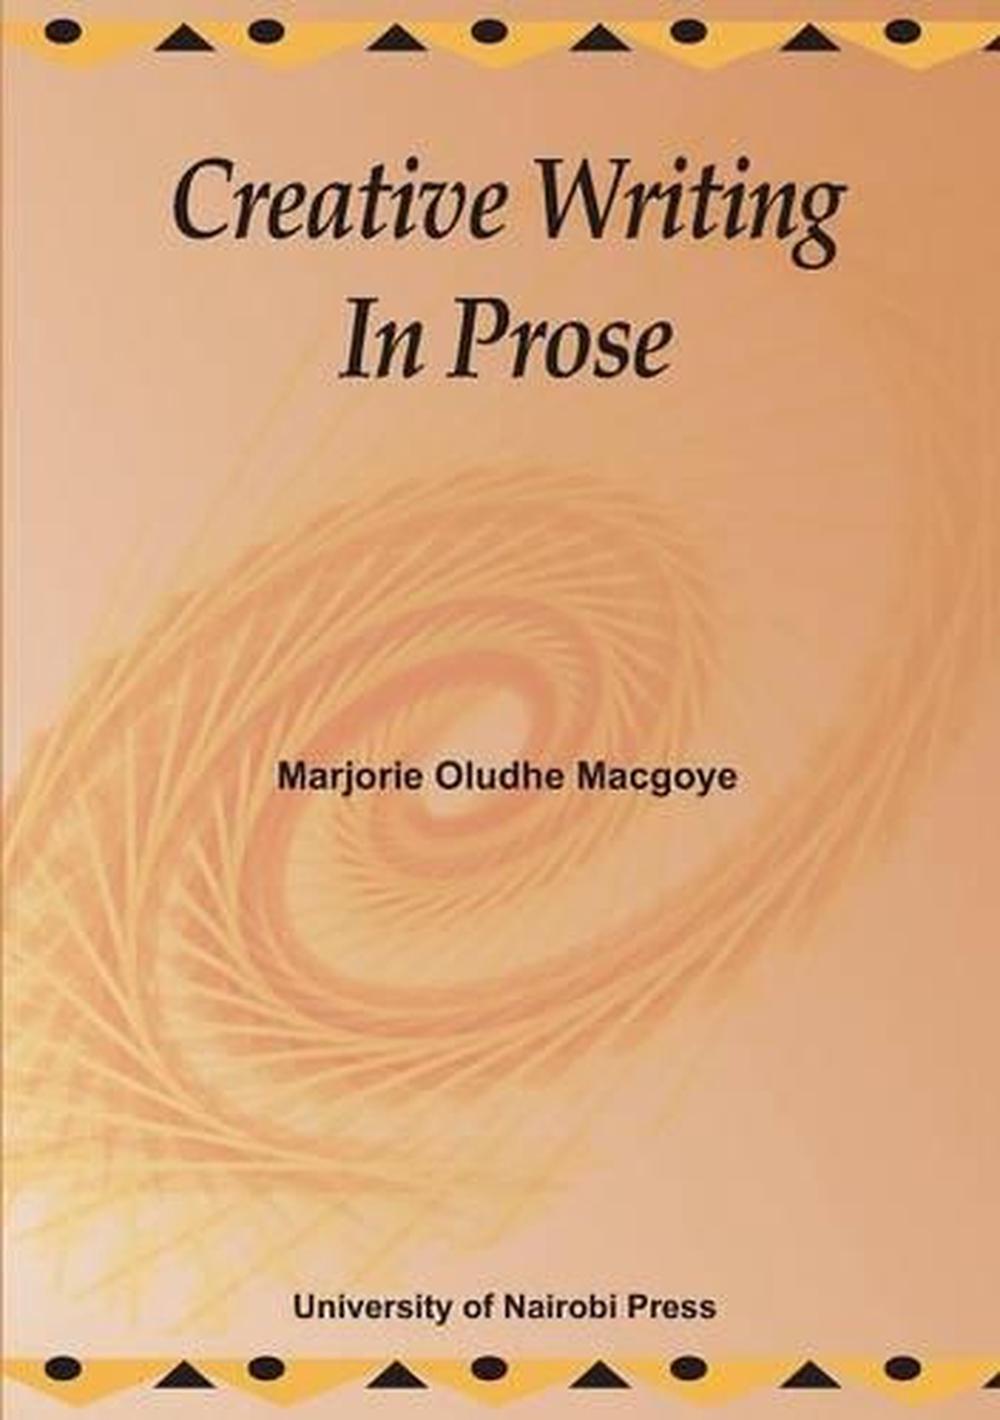 creative writing about prose